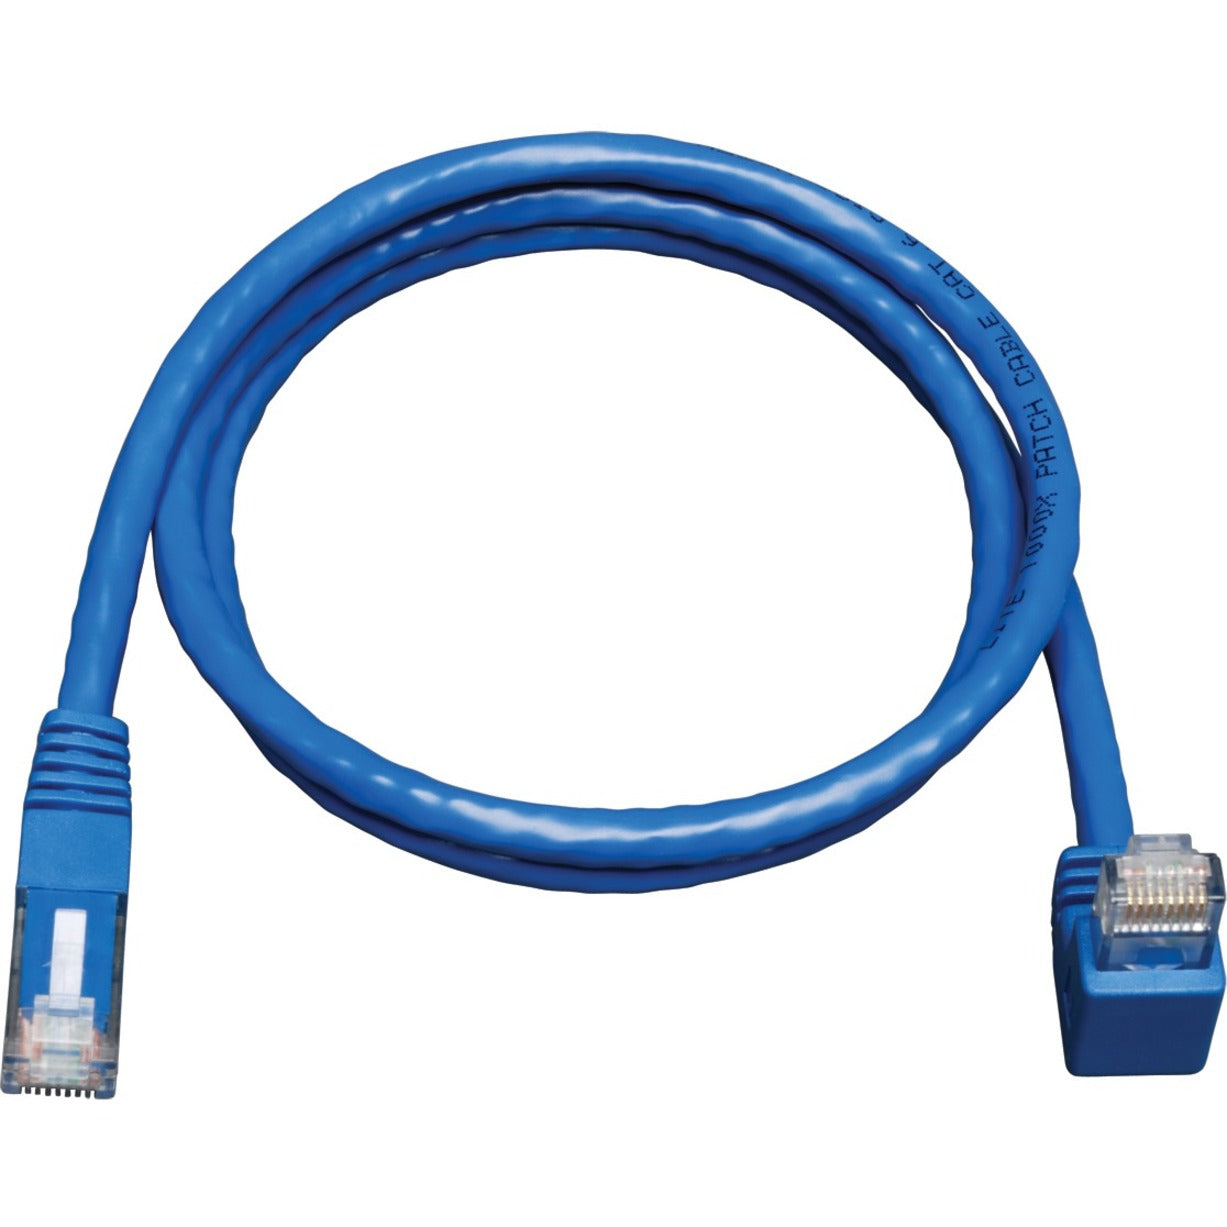 Tripp Lite N204-003-BL-DN Cat6 Patch Cable, 3 ft, Right-angled Connector, Molded, Stranded, Blue